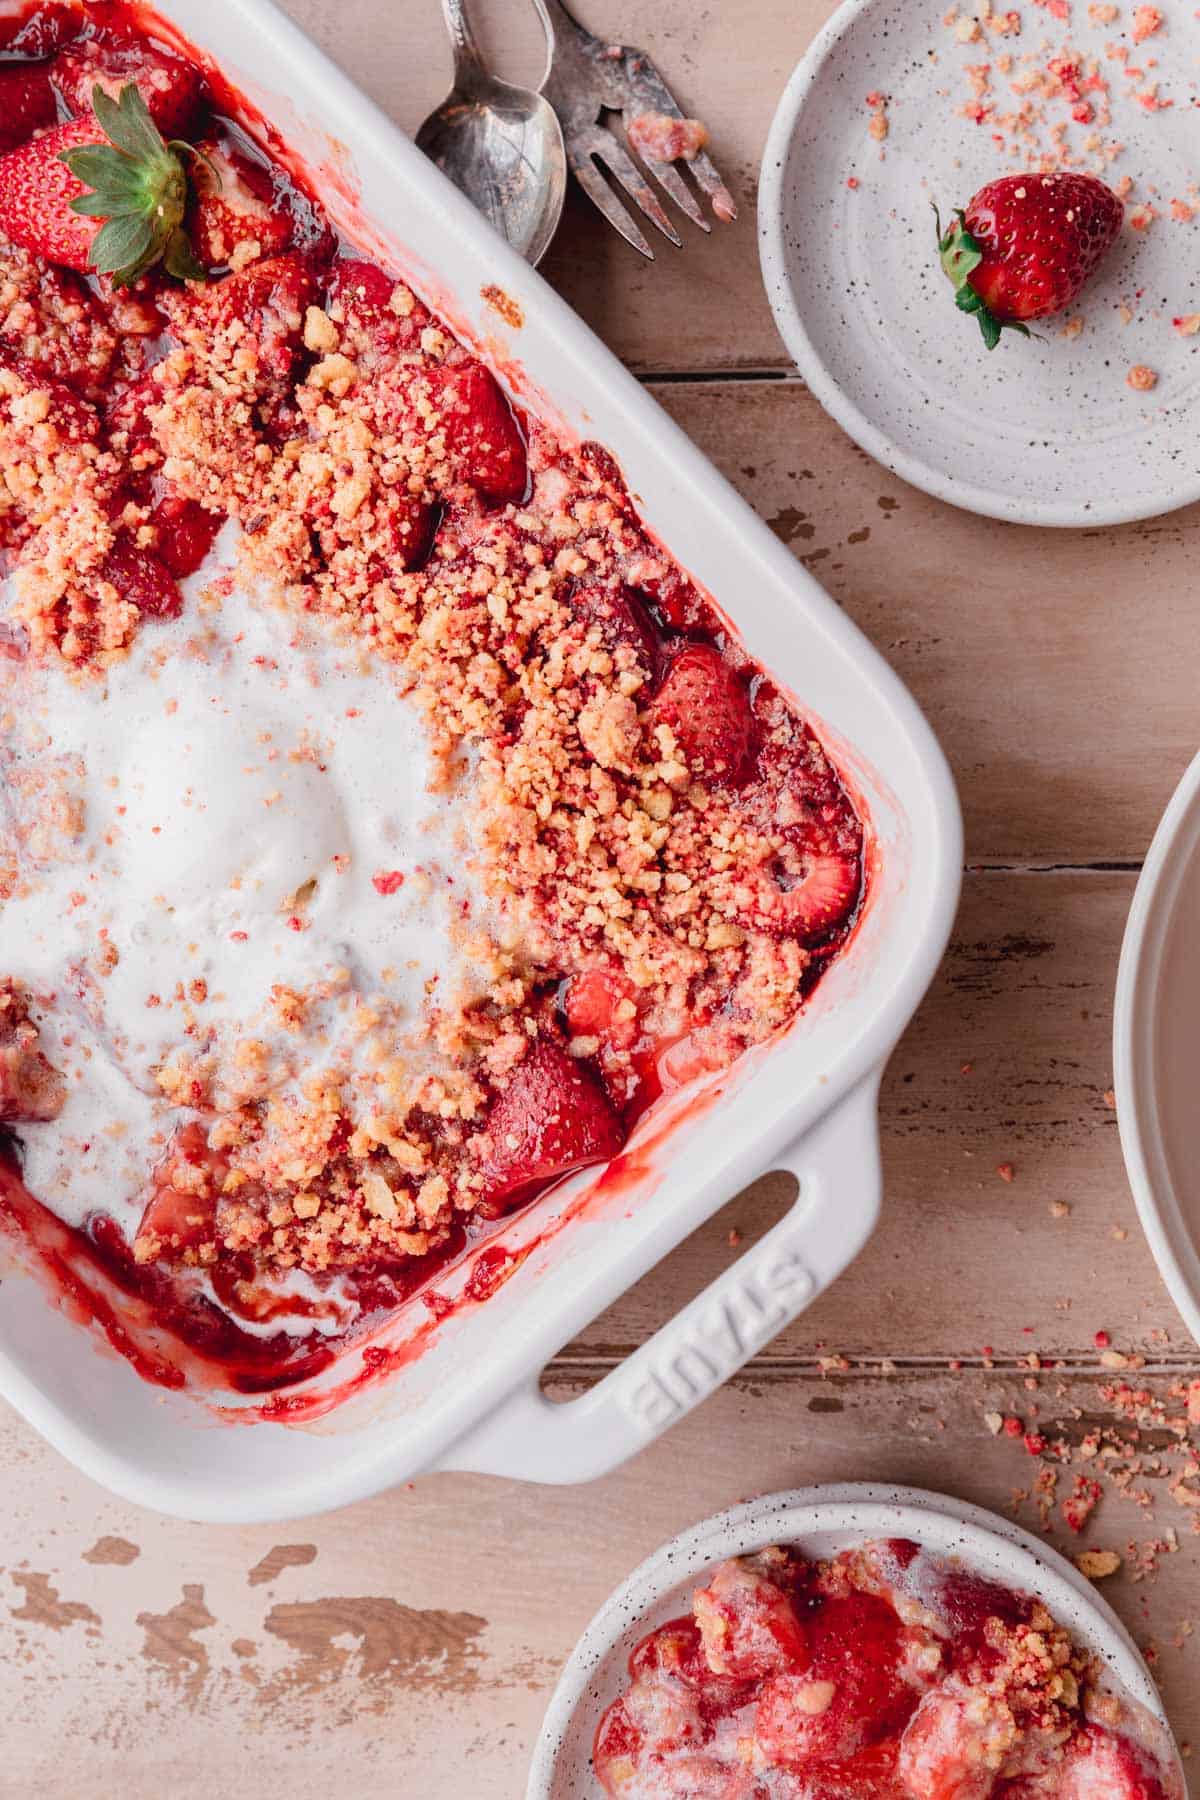 Strawberry Crumble topped with ice cream in a white baking dish.